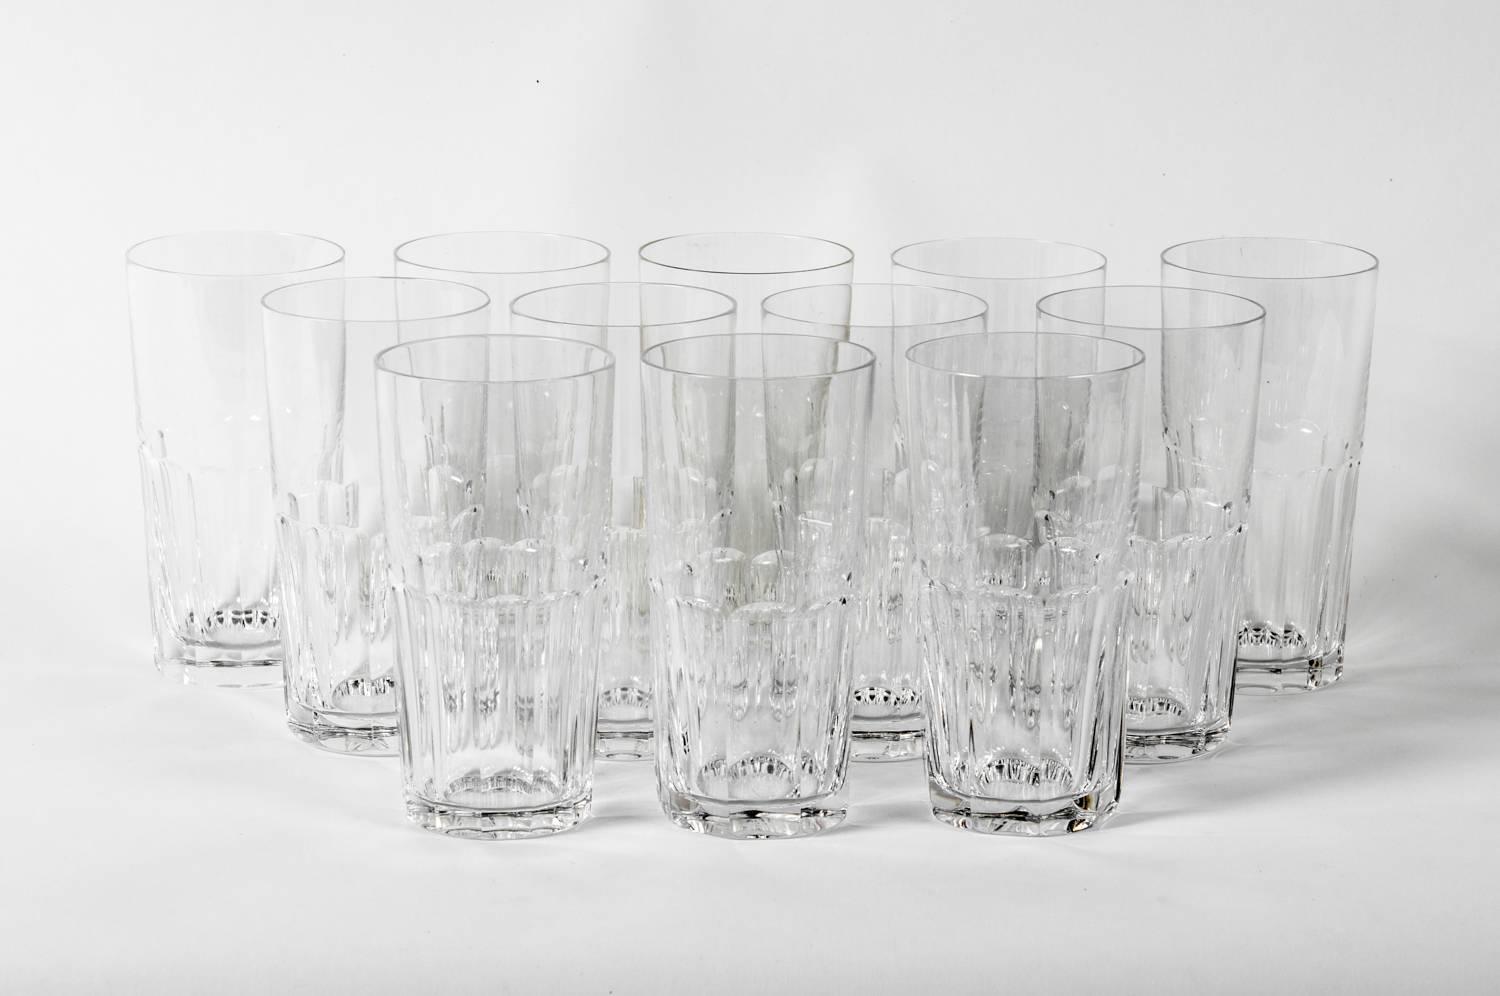 Vintage Saint Louis crystal set of 12 high ball glasses. Excellent condition. Each glass measure 5.5 inches high x 3 inches top diameter.